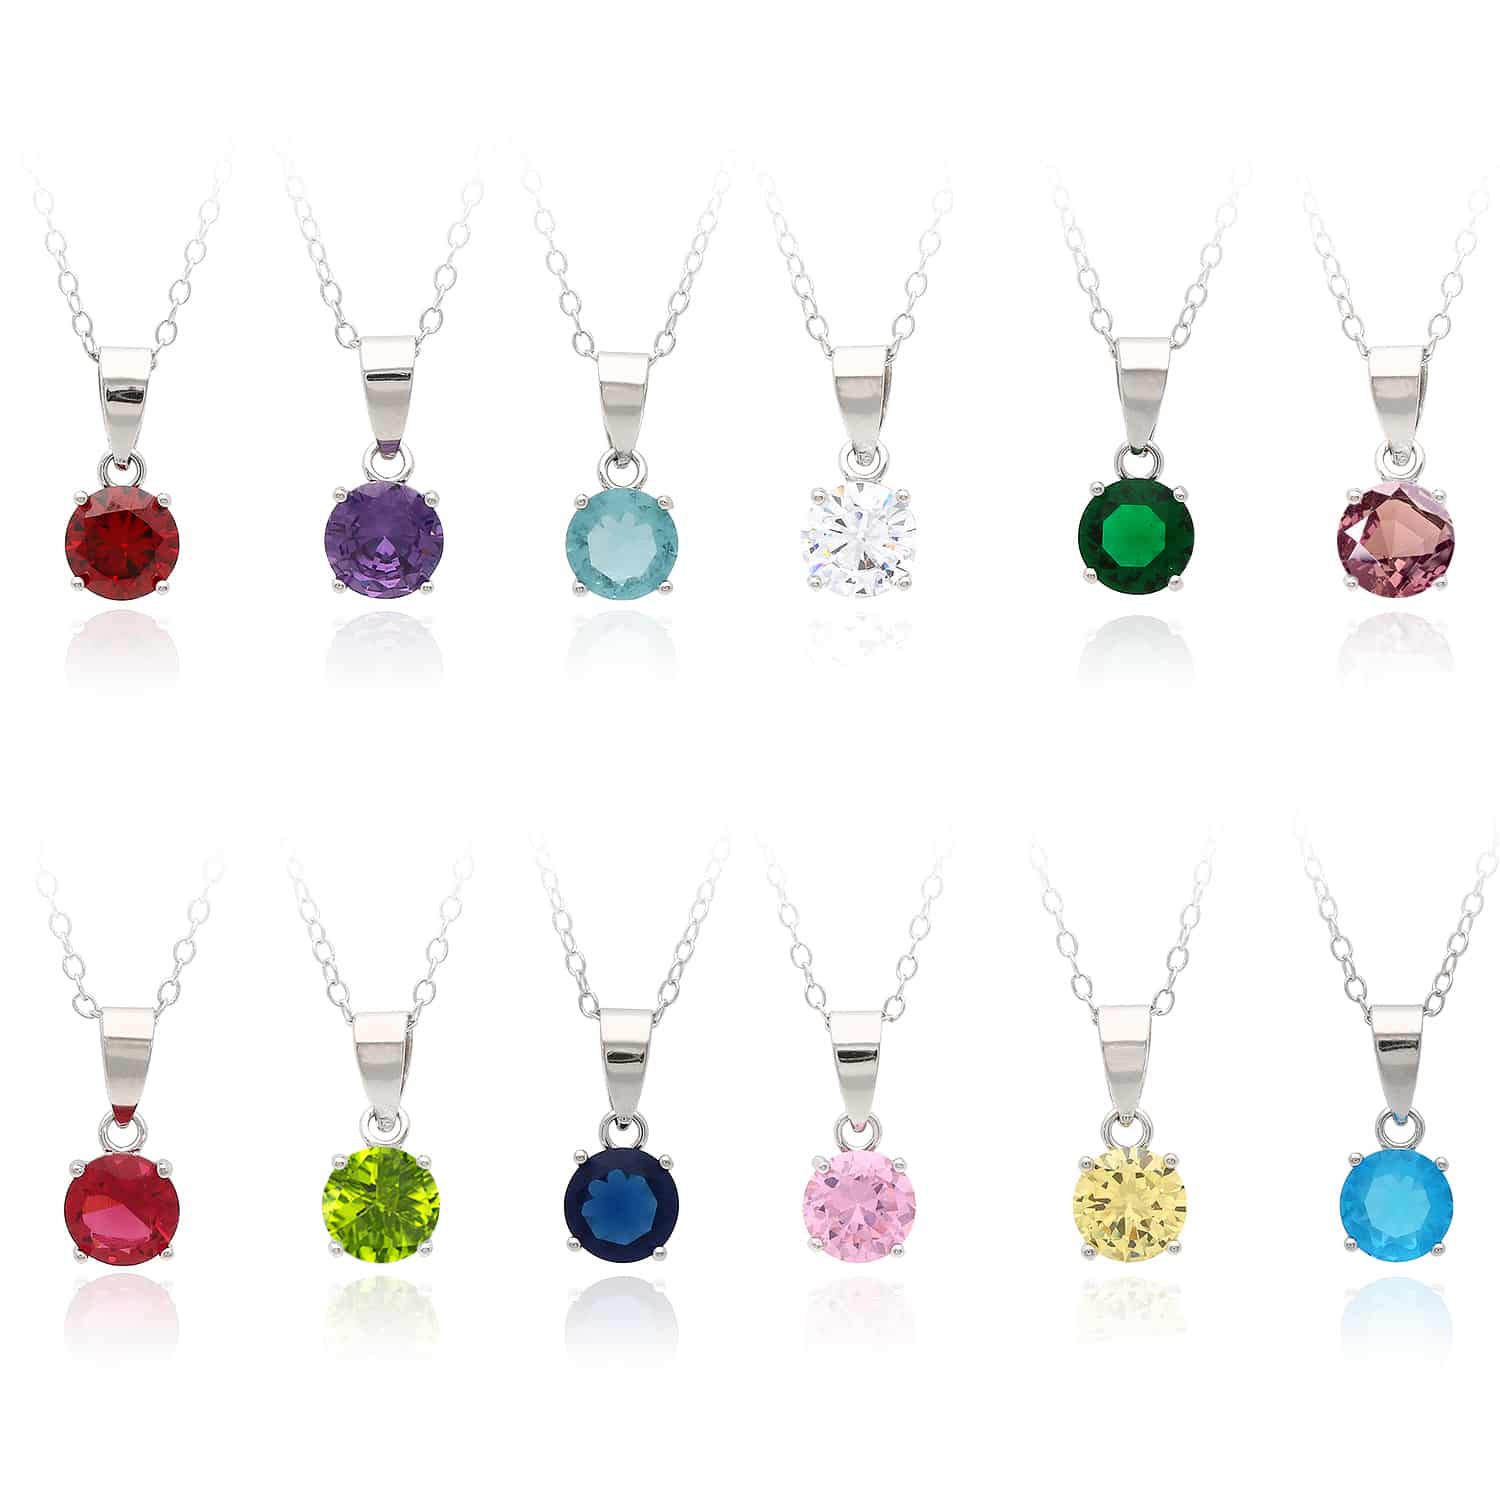 Sterling Silver Round-Cut Solitaire Birthstone Pendant Chain Necklace 16-18" Adj - January - Garnet